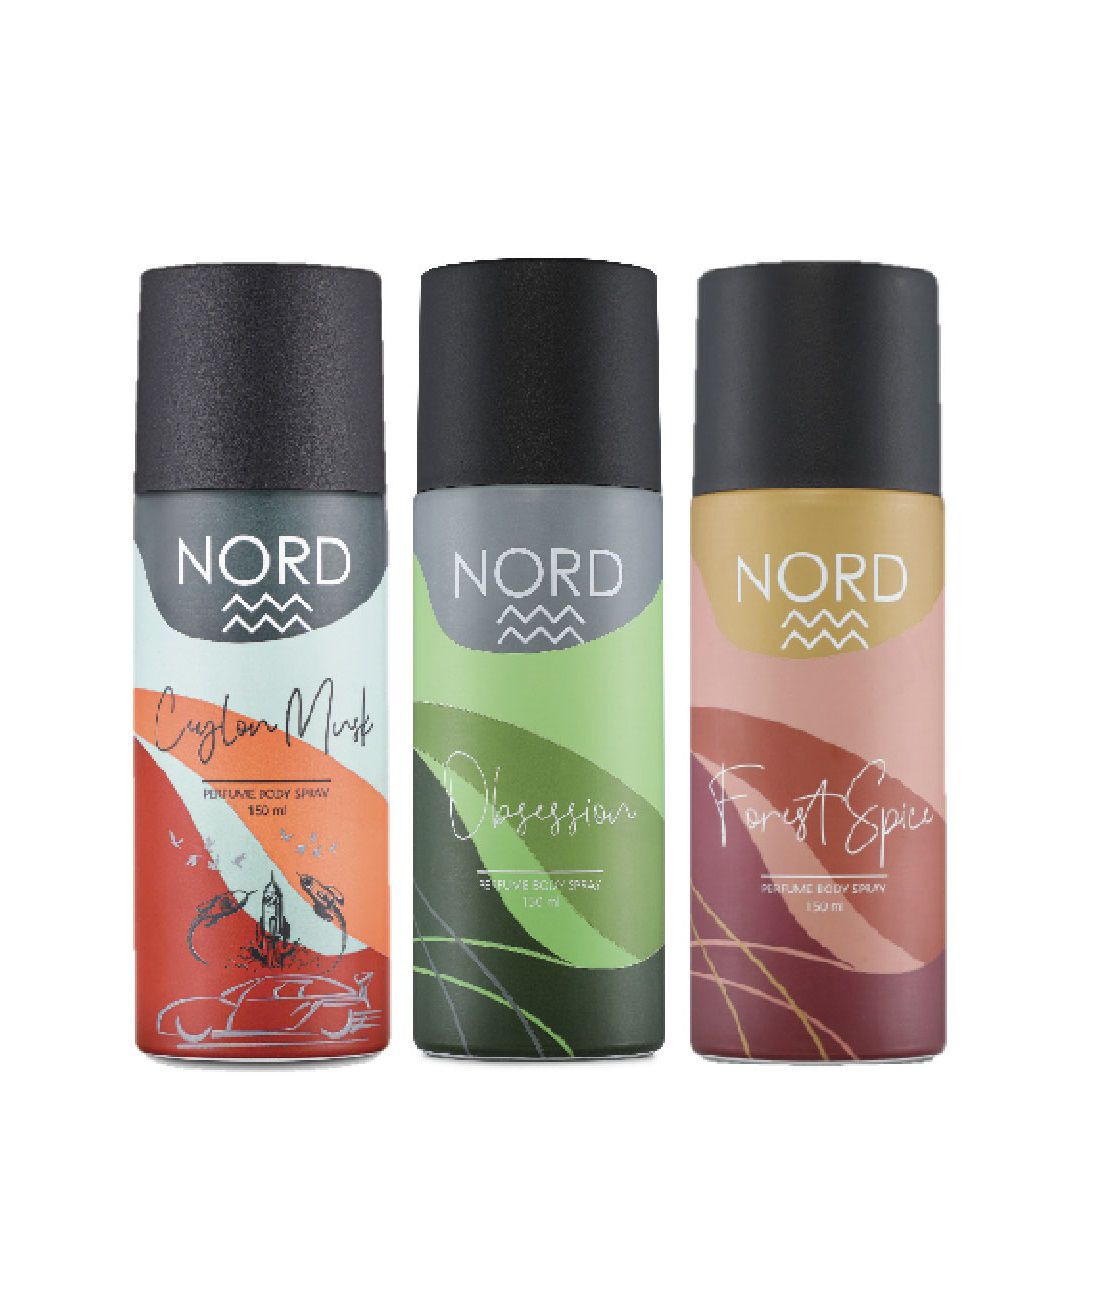     			NORD Deodorant Body Spray - Obsession, Forest Spice and Ceylon Musk 150 ml each (Pack of 3)